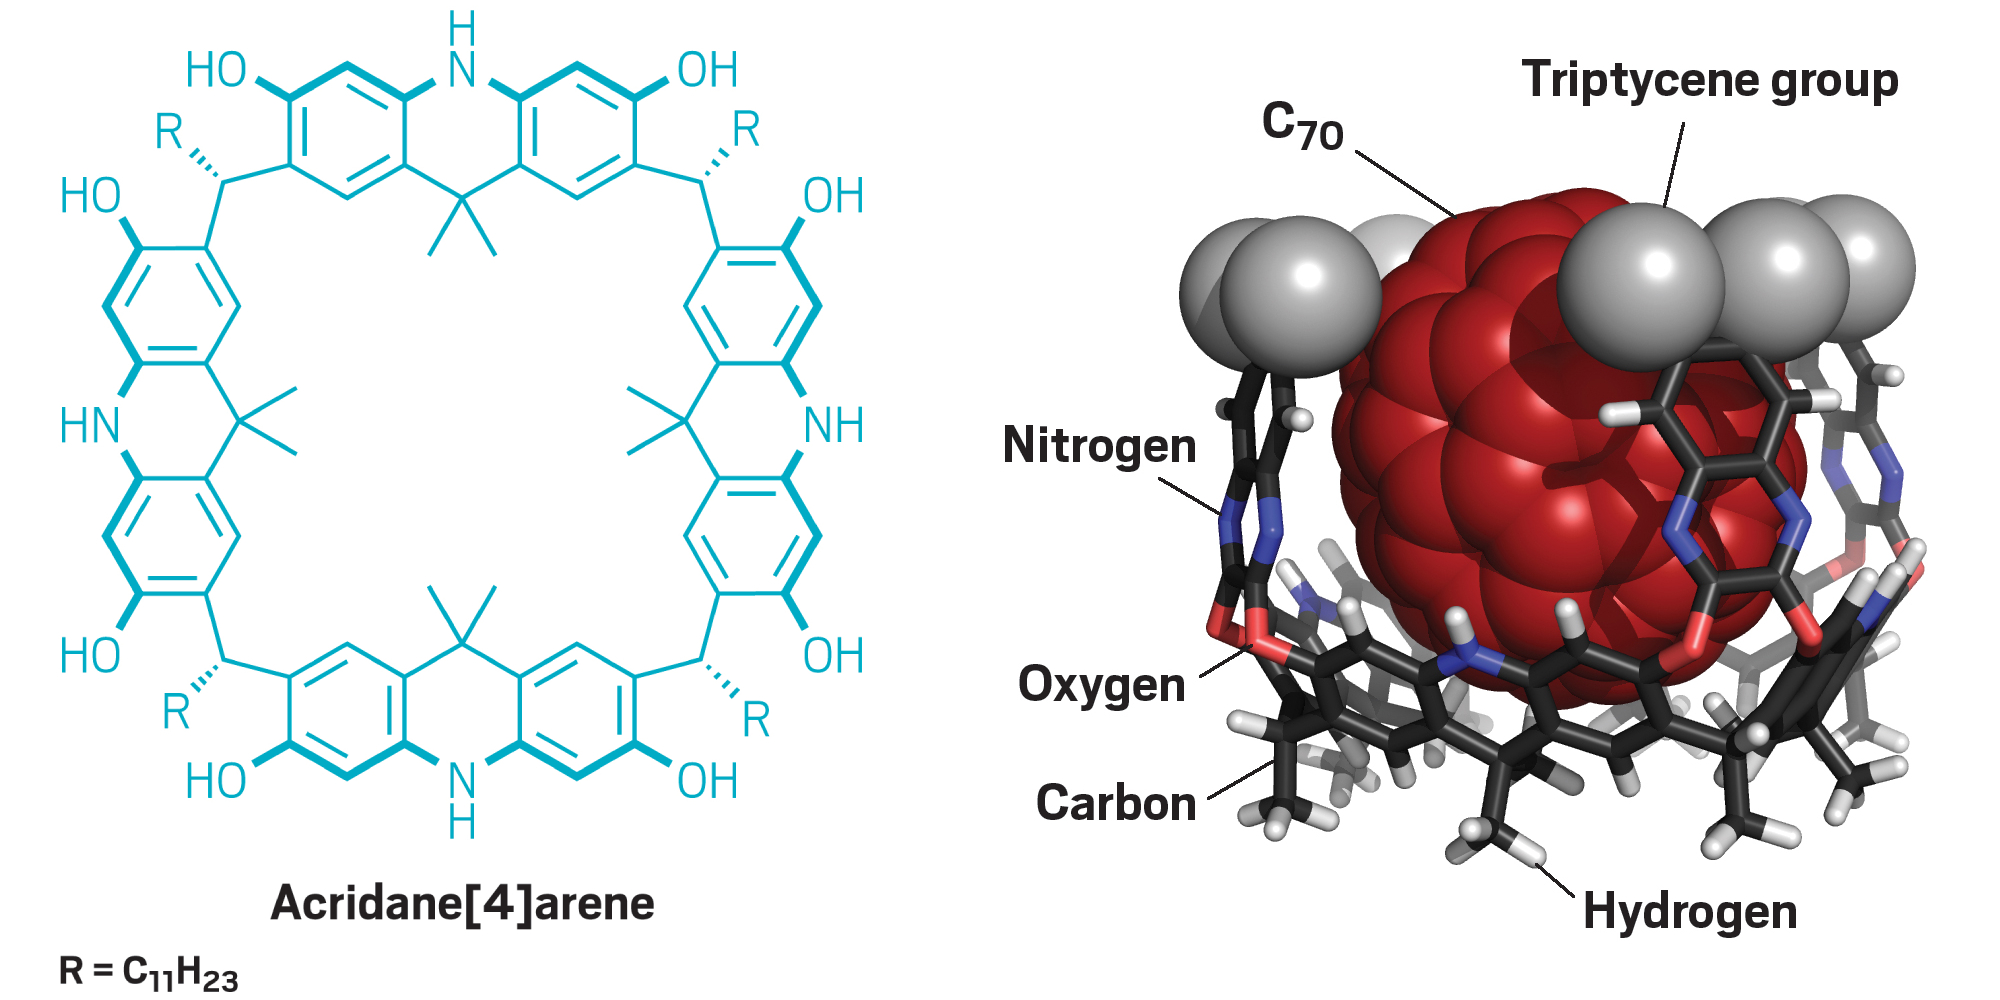 A molecular model shows how the largest of the new cavitands binds C<sub>70</sub>. A structure of acridane[4]arene